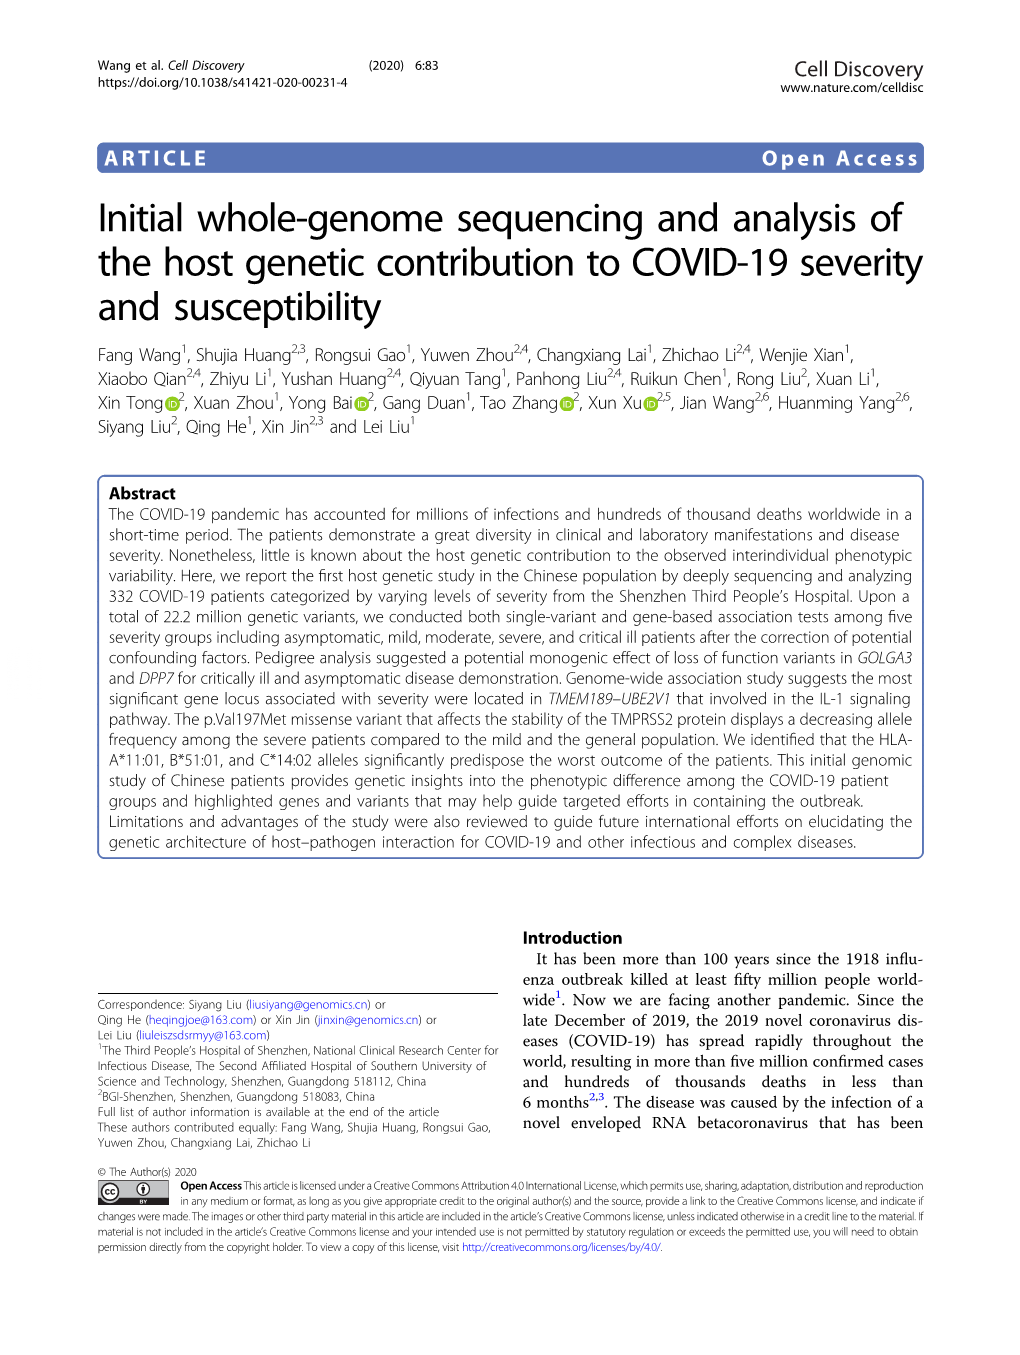 Initial Whole-Genome Sequencing and Analysis of the Host Genetic